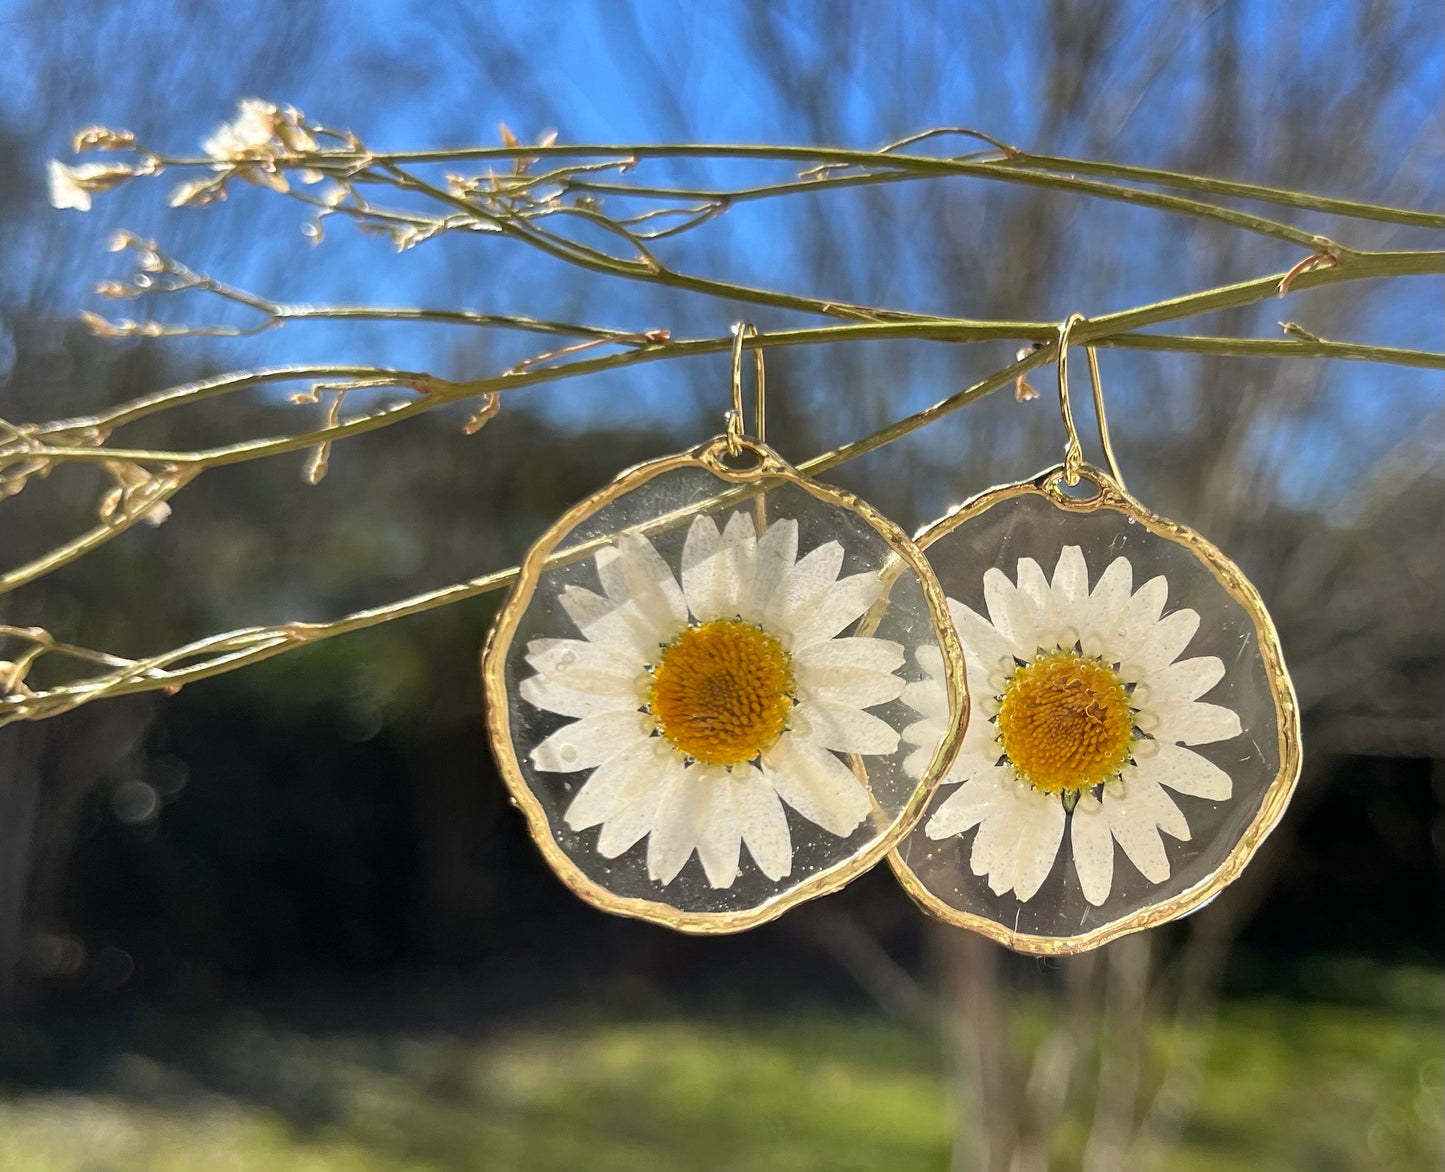 Handmade minimalist Earrings. Made with pressed Daisy flowers. Hypoallergenic Earrings. 14K gold Plated.